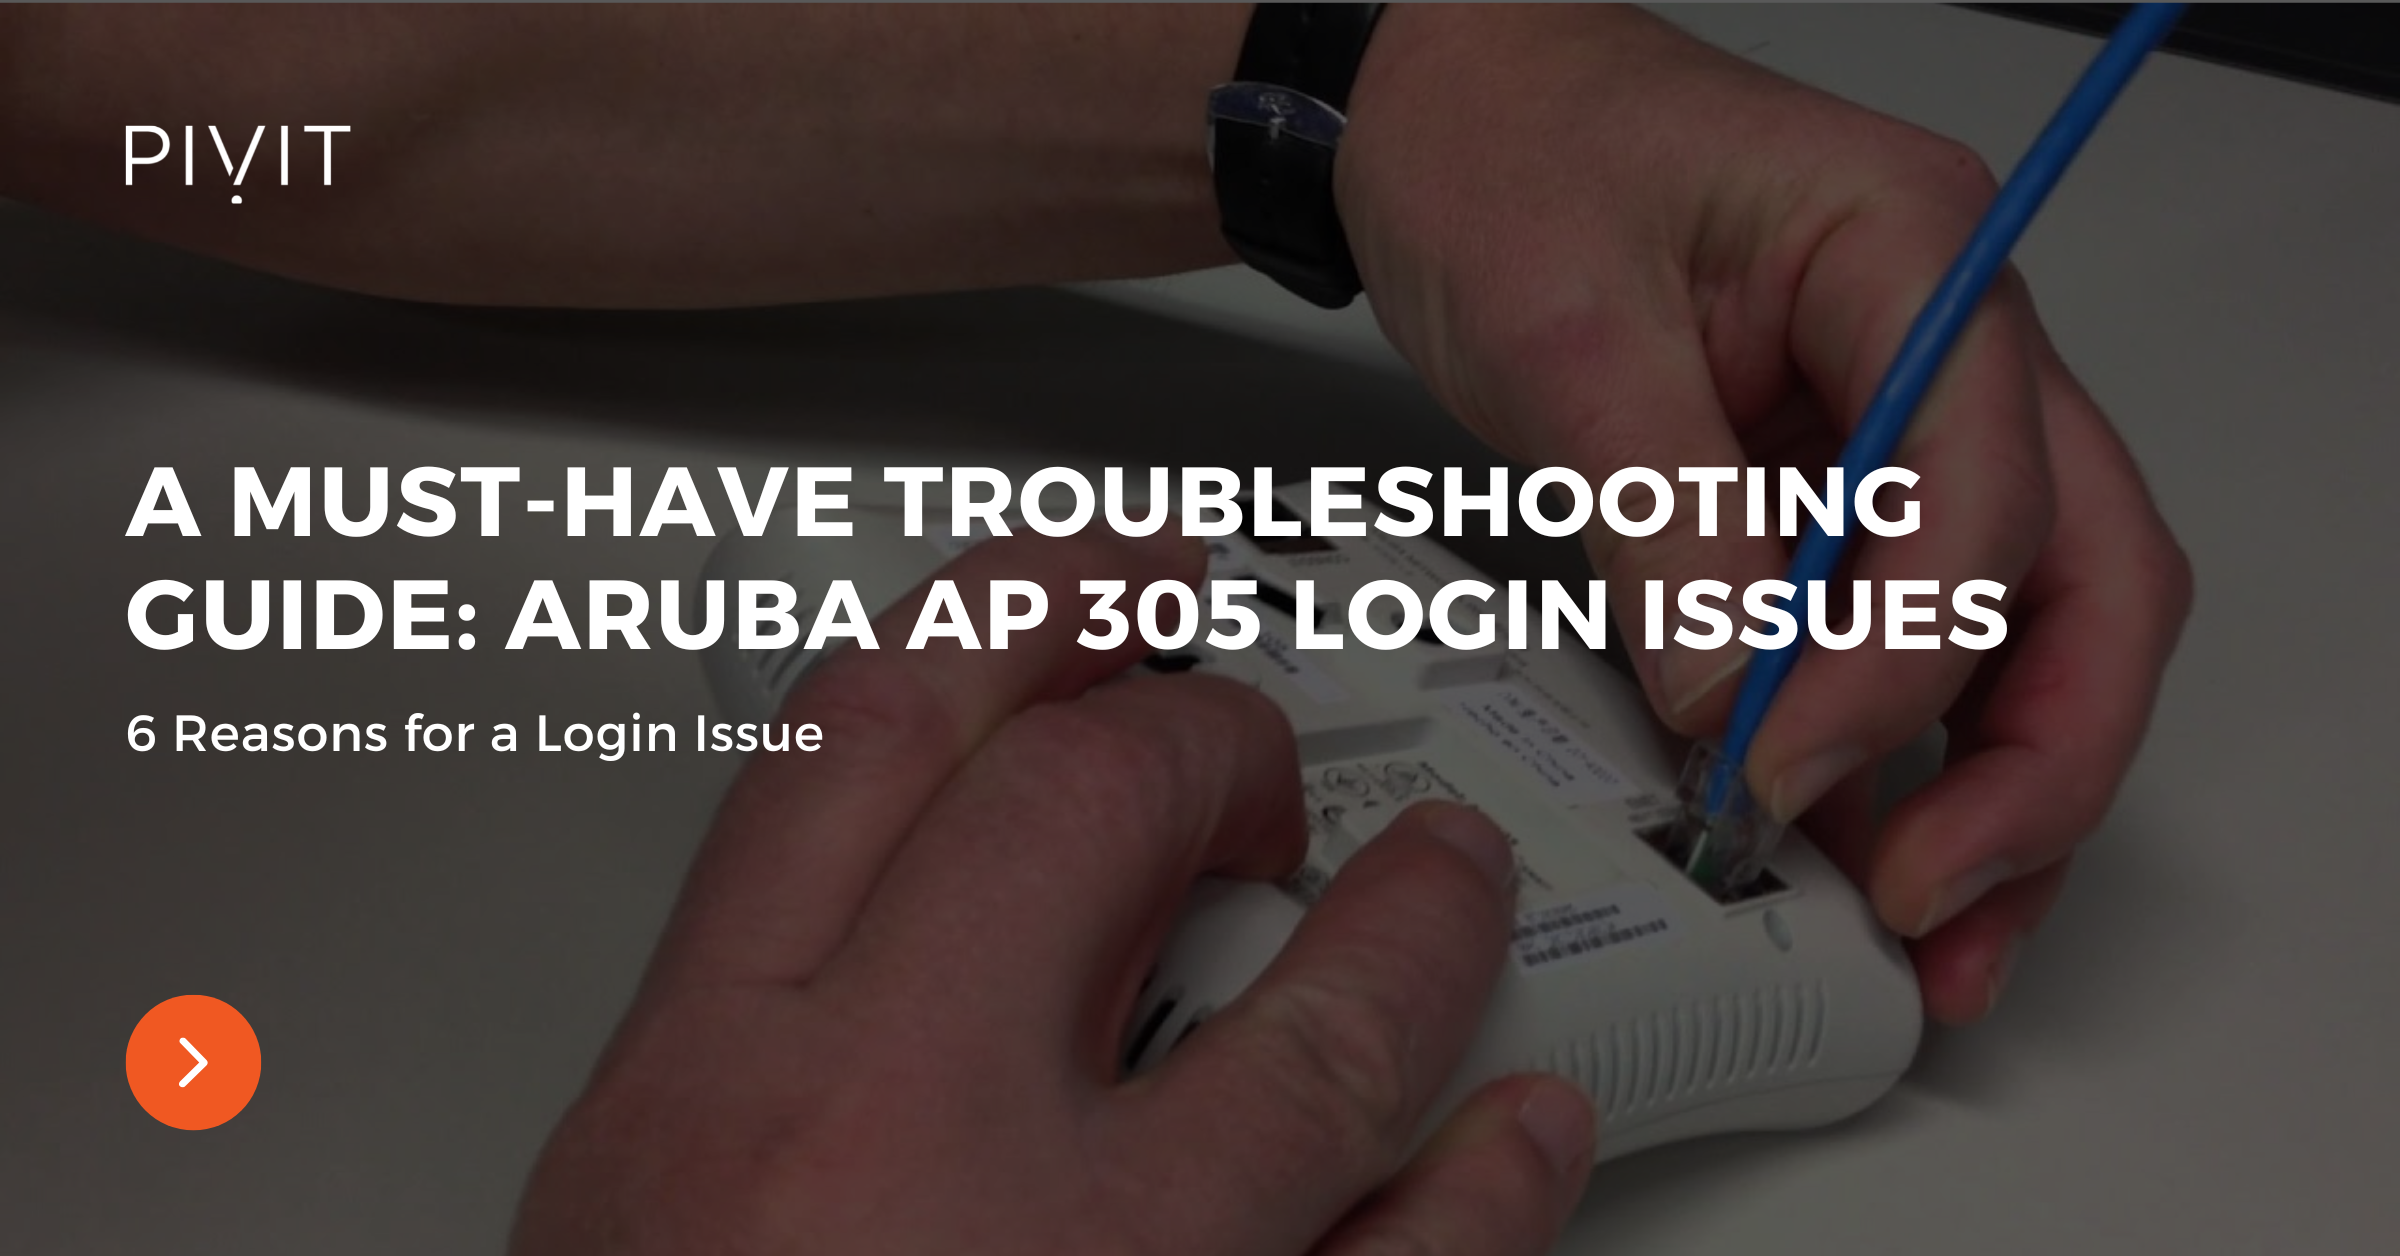 A Must-Have Troubleshooting Guide: Aruba AP 305 Login Issues